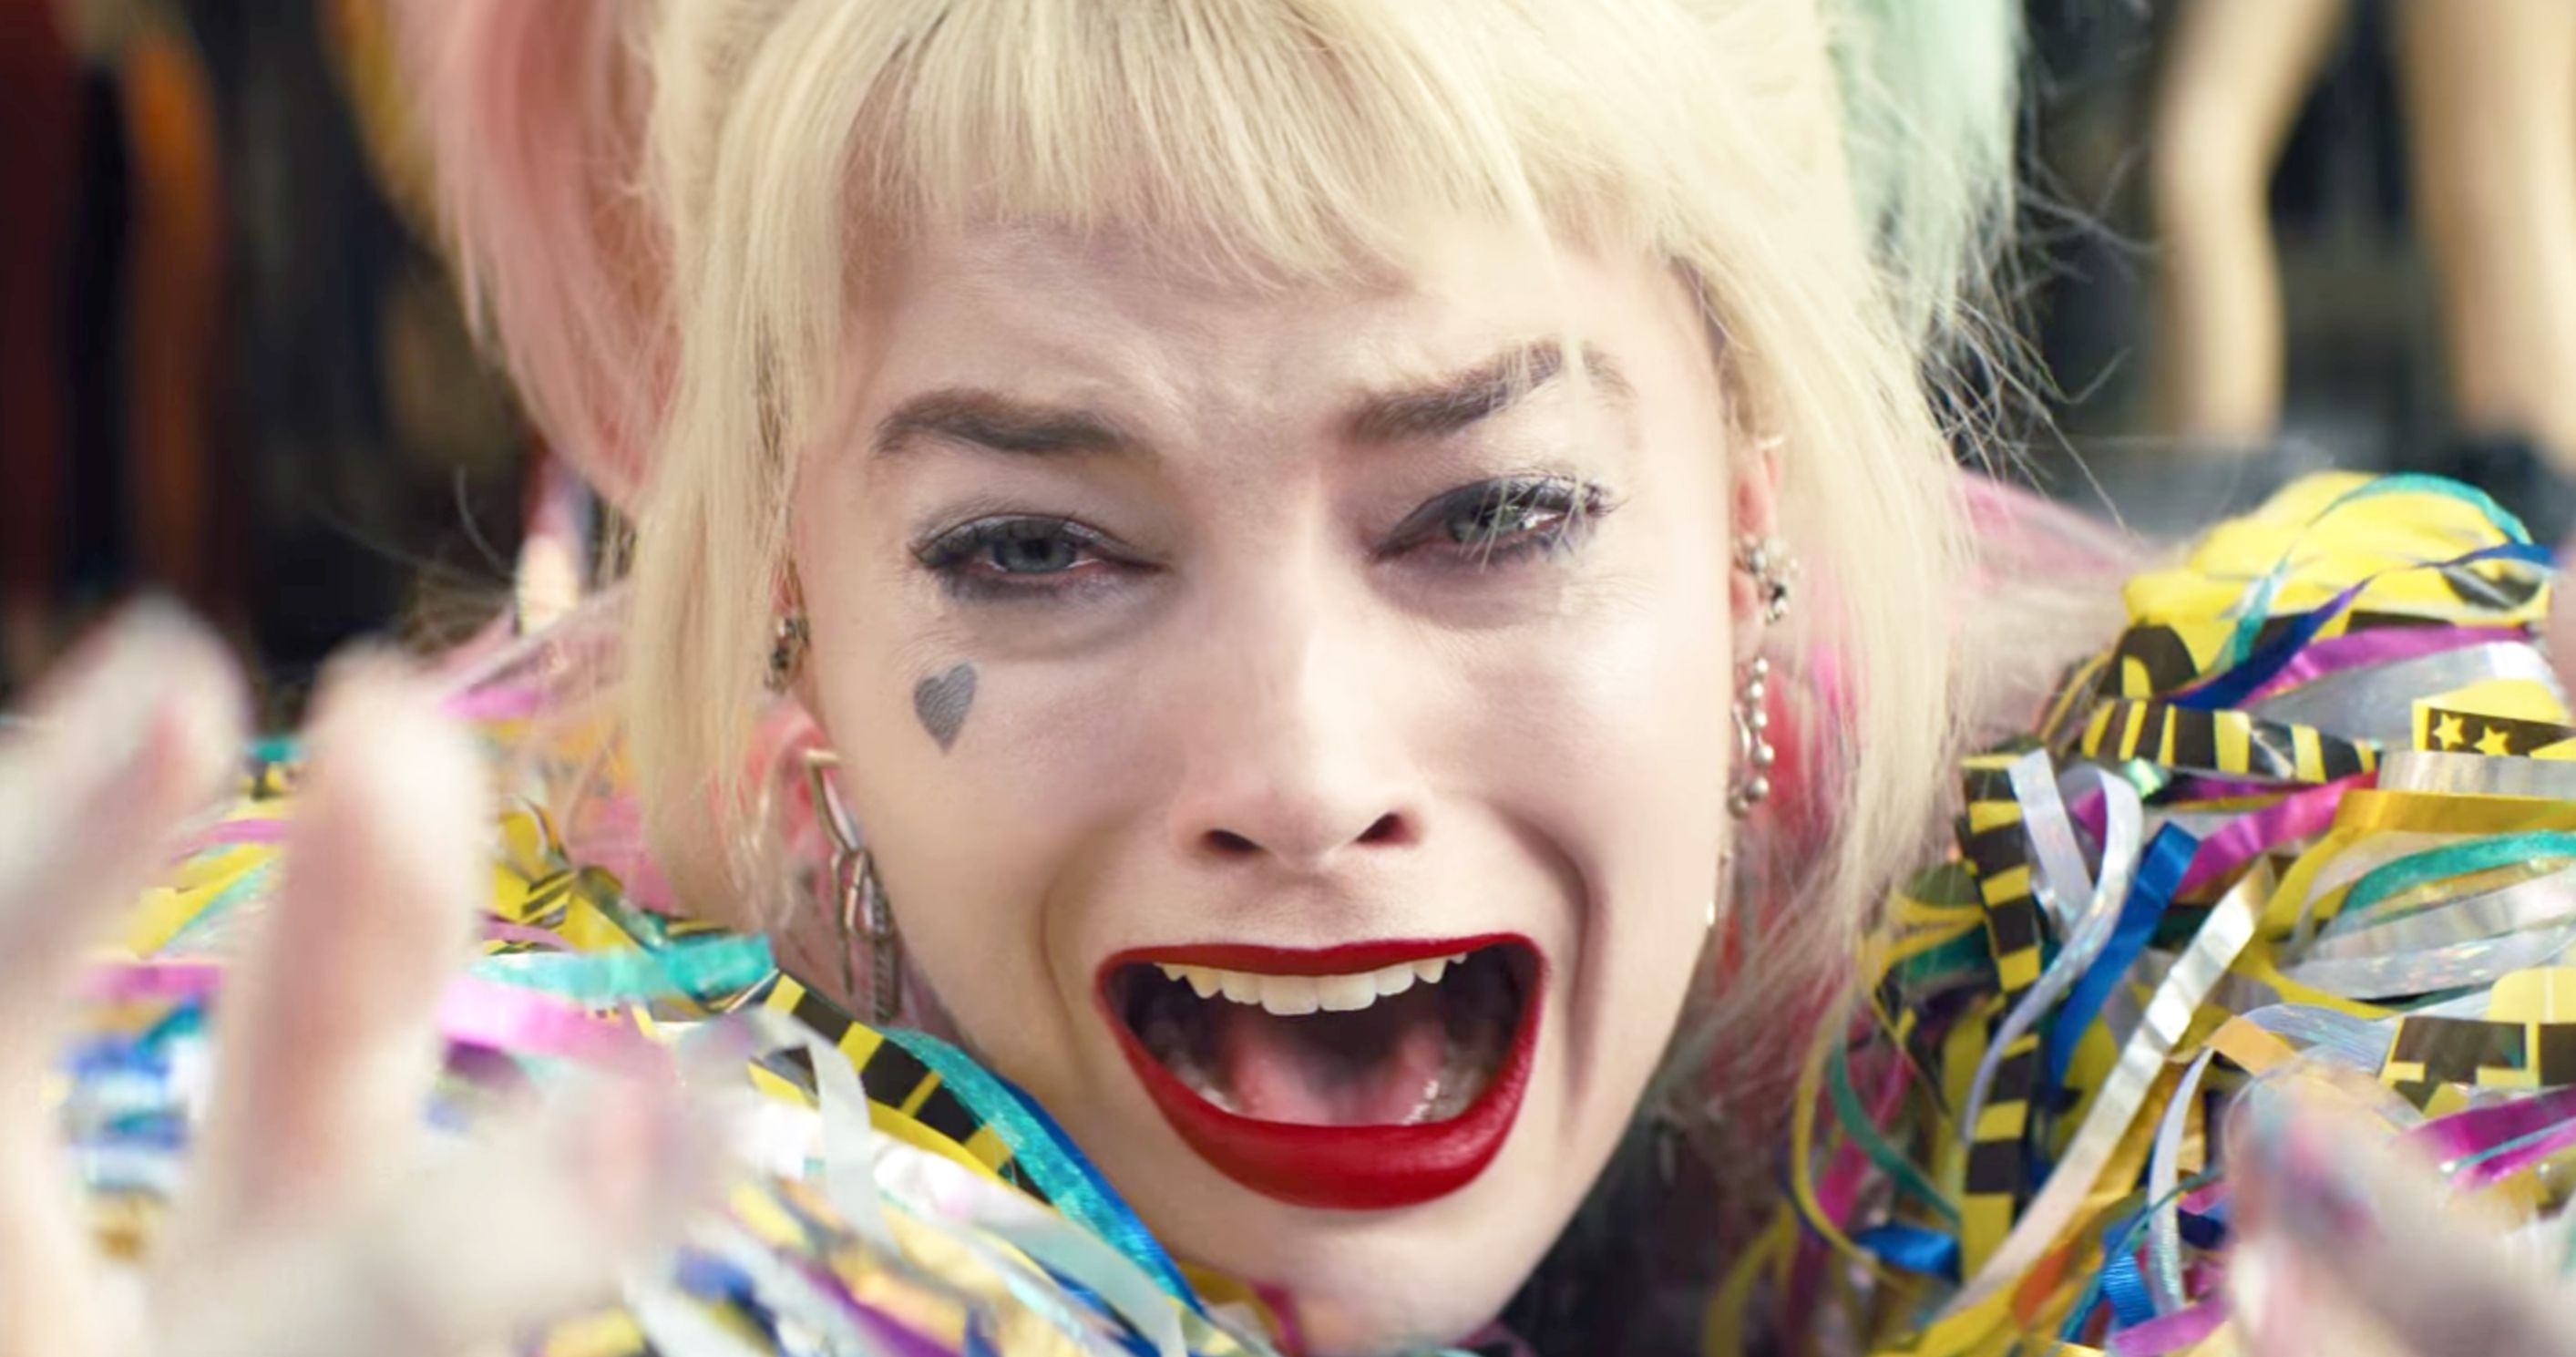 Birds of Prey Trailer Is Here, Harley Quinn Is Back as DC's Queen of Crime